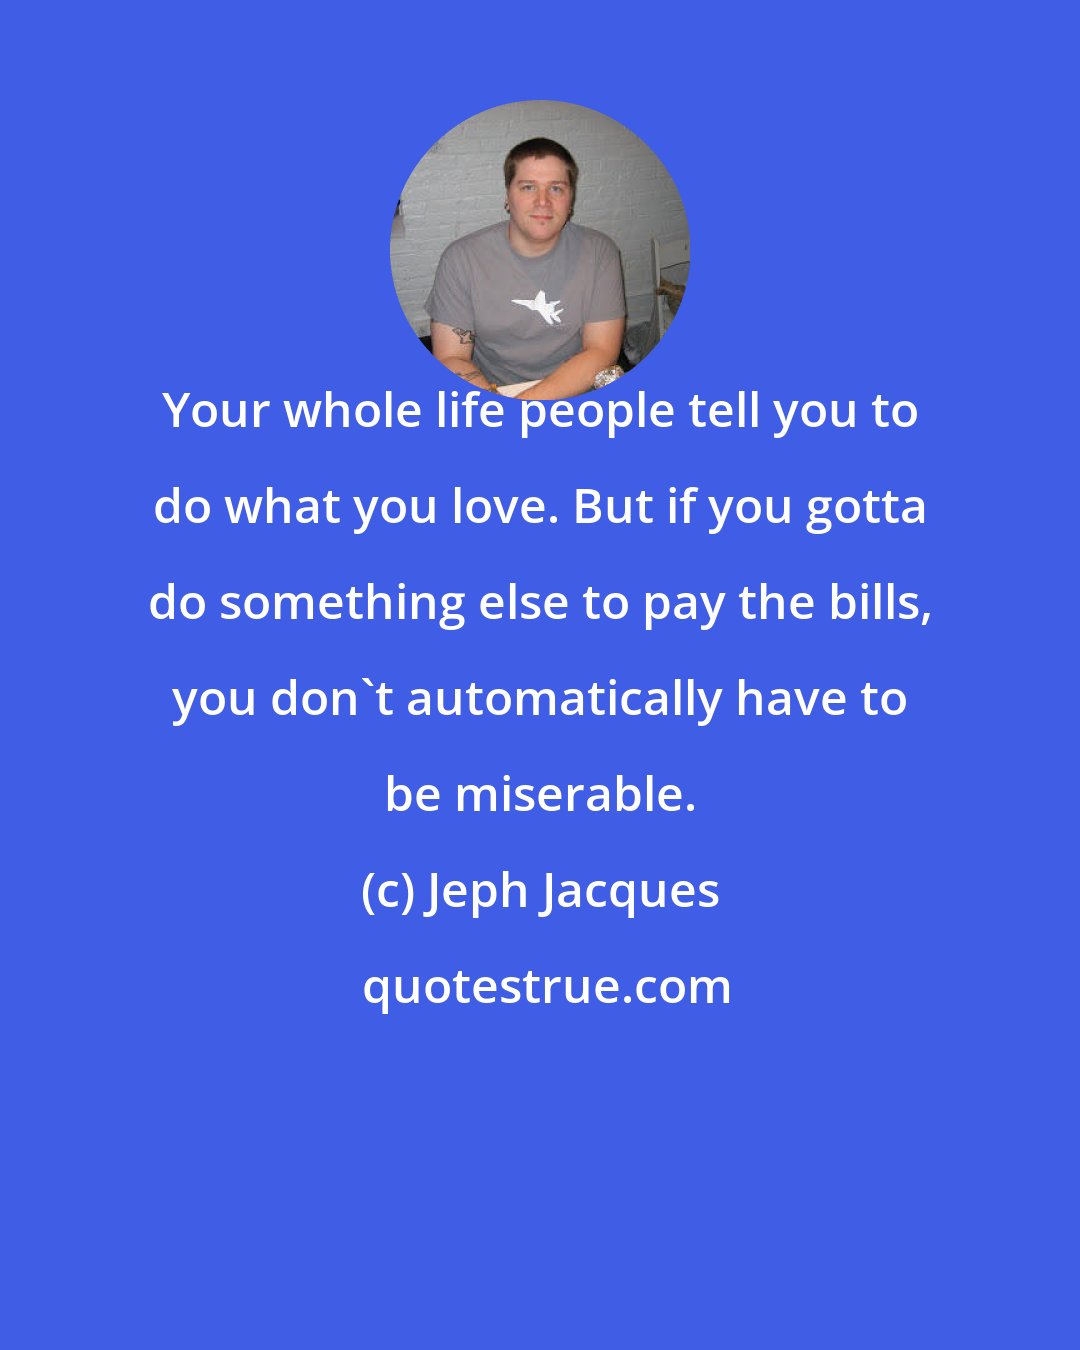 Jeph Jacques: Your whole life people tell you to do what you love. But if you gotta do something else to pay the bills, you don't automatically have to be miserable.